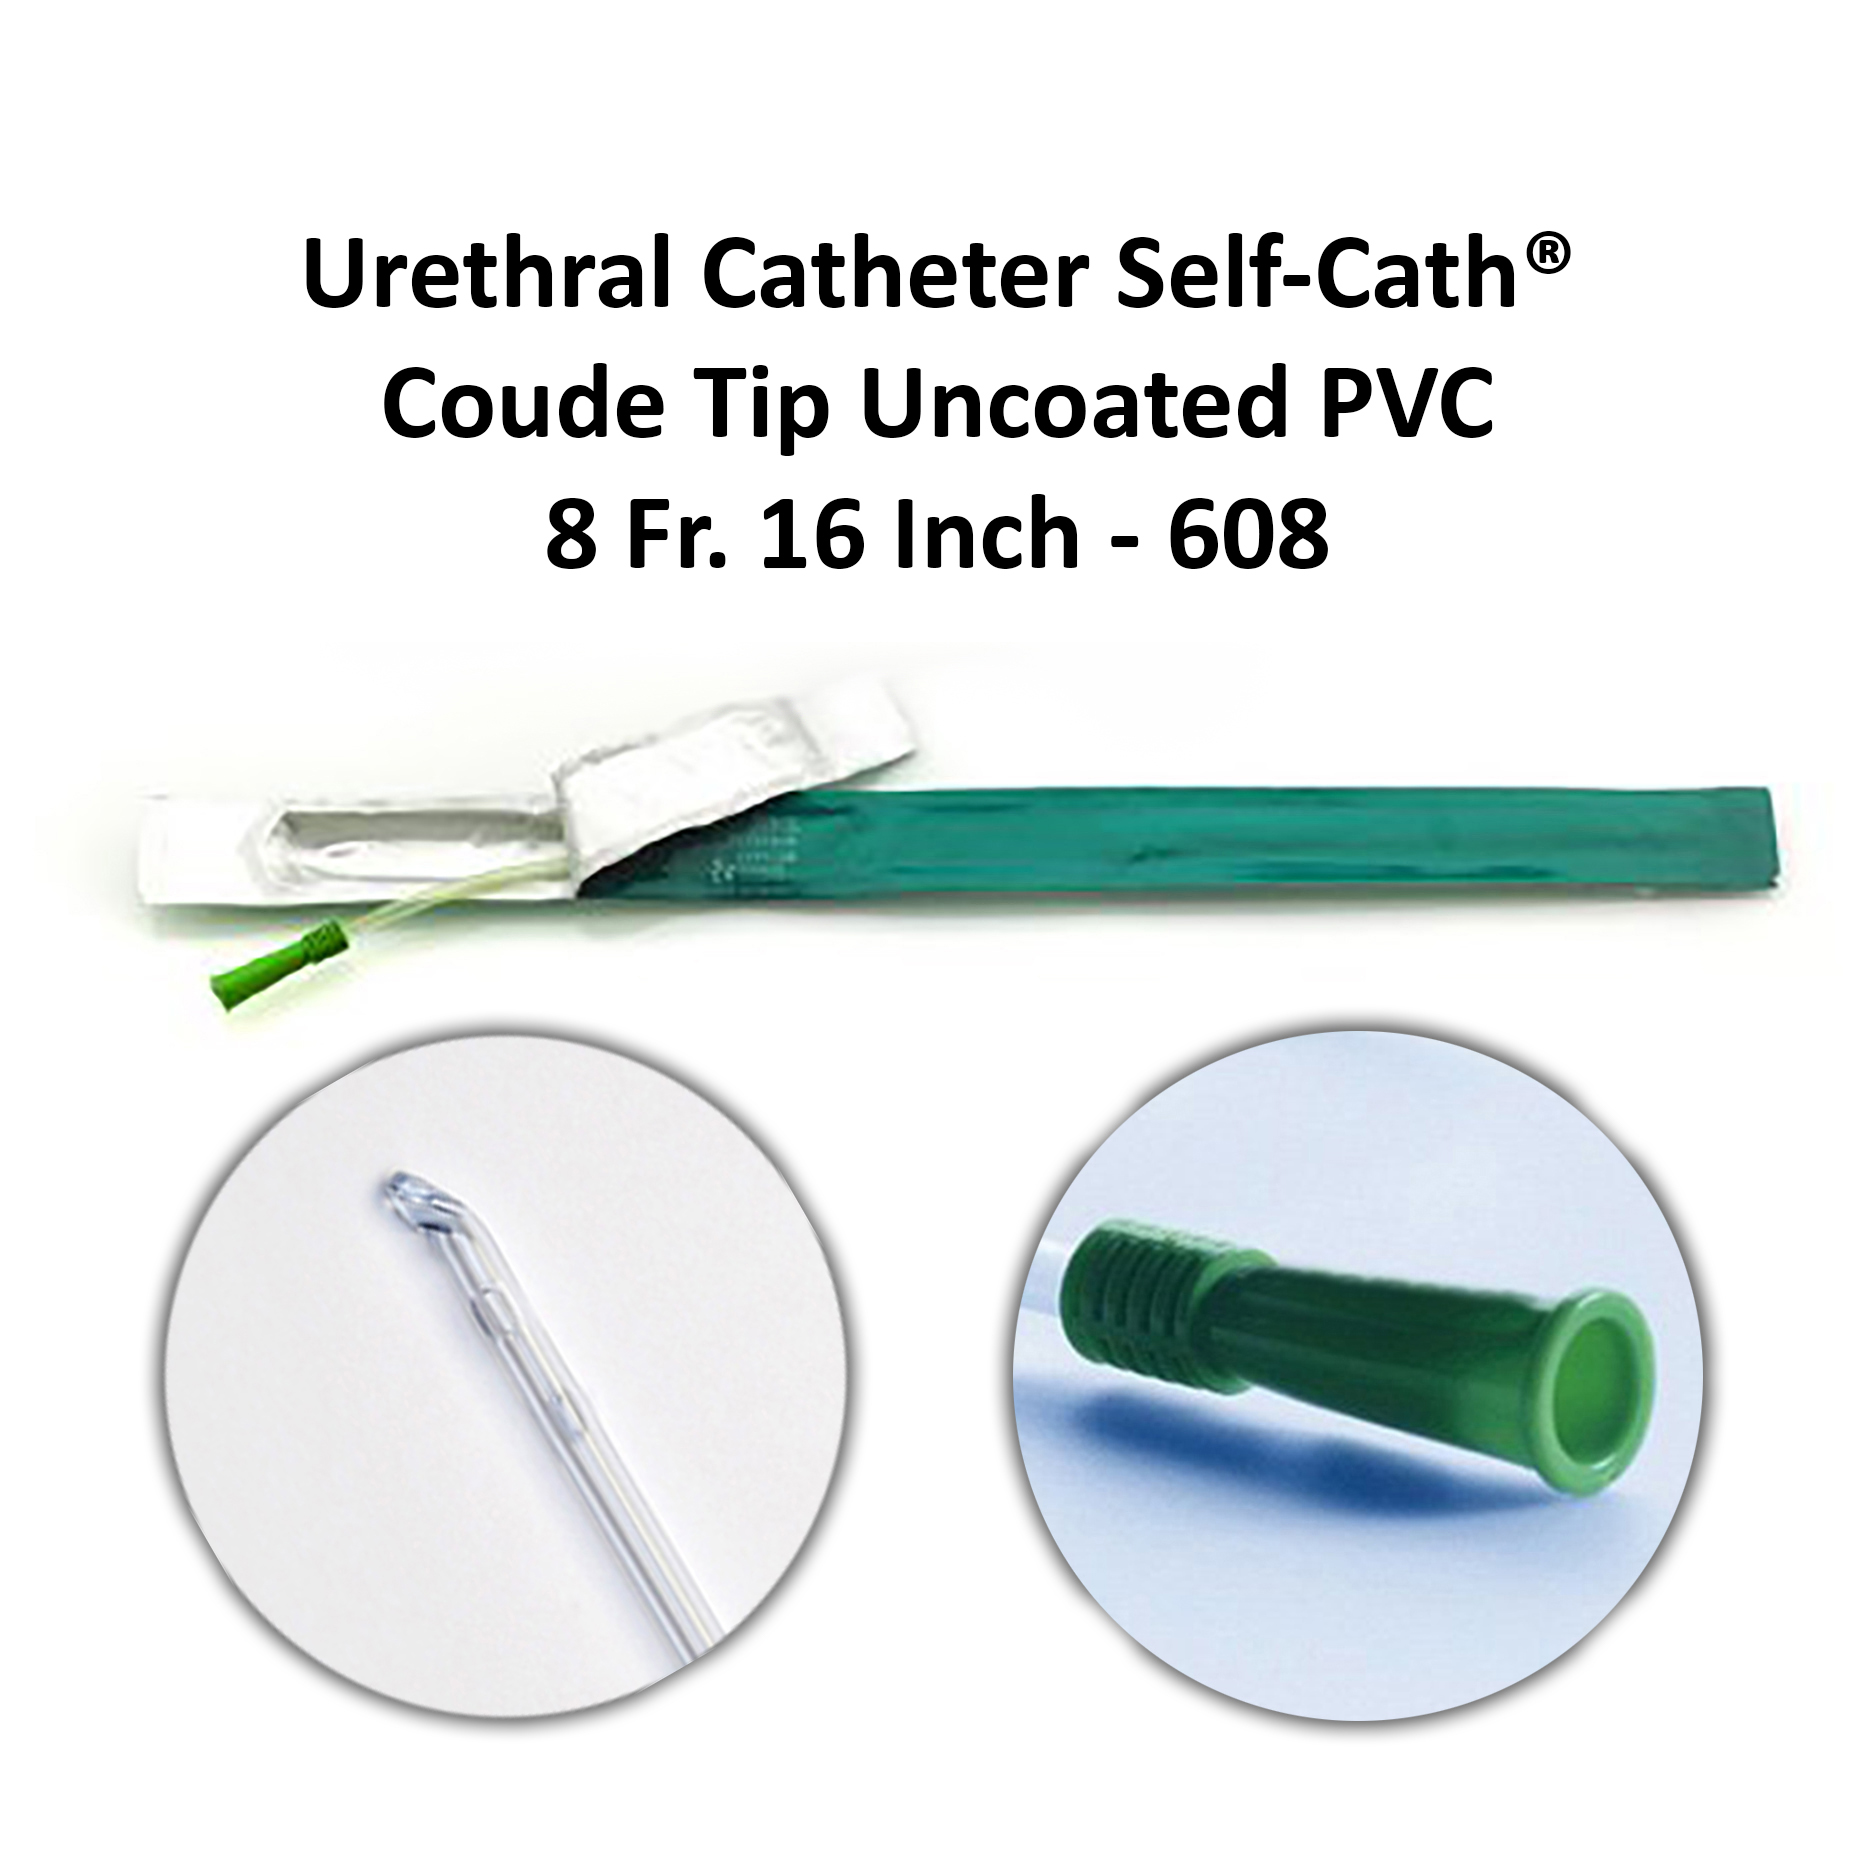 Urethral Catheter Self-Cath® Coude Tip Uncoated PVC 8 Fr - 16 Inch - 608 Available in Michigan USA